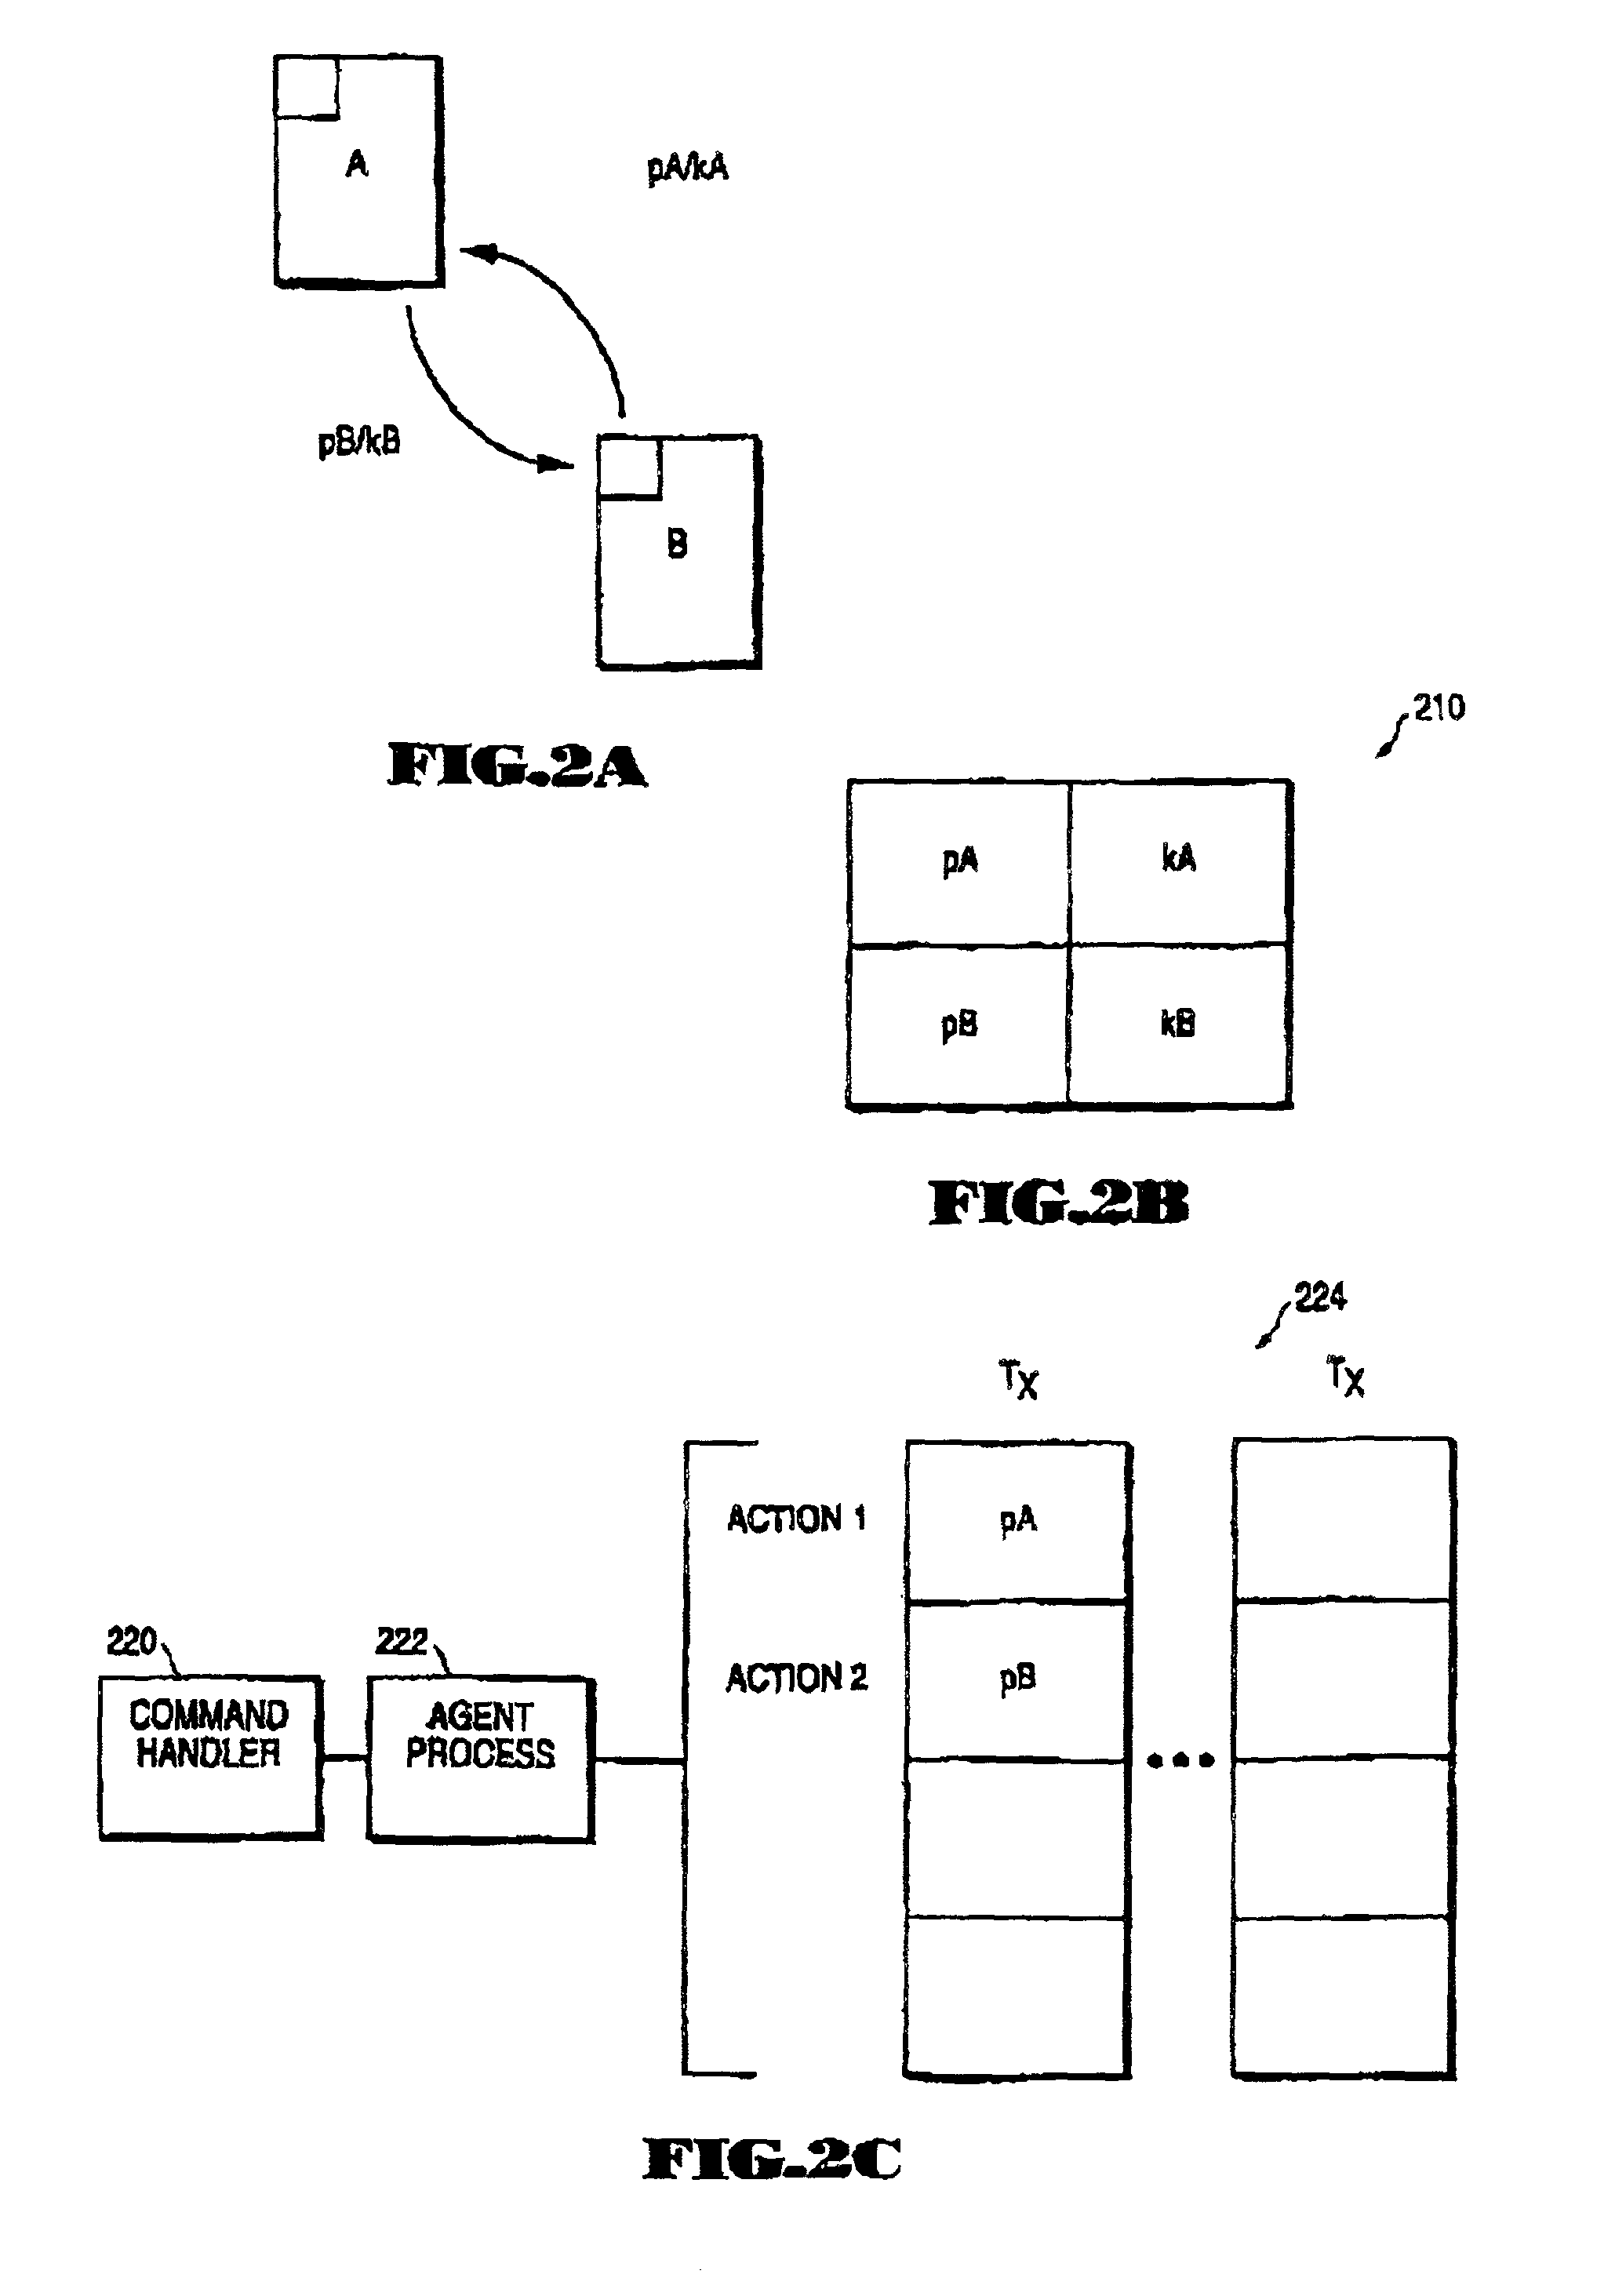 System for managing configuration memory with transaction and redundancy support in an optical network element